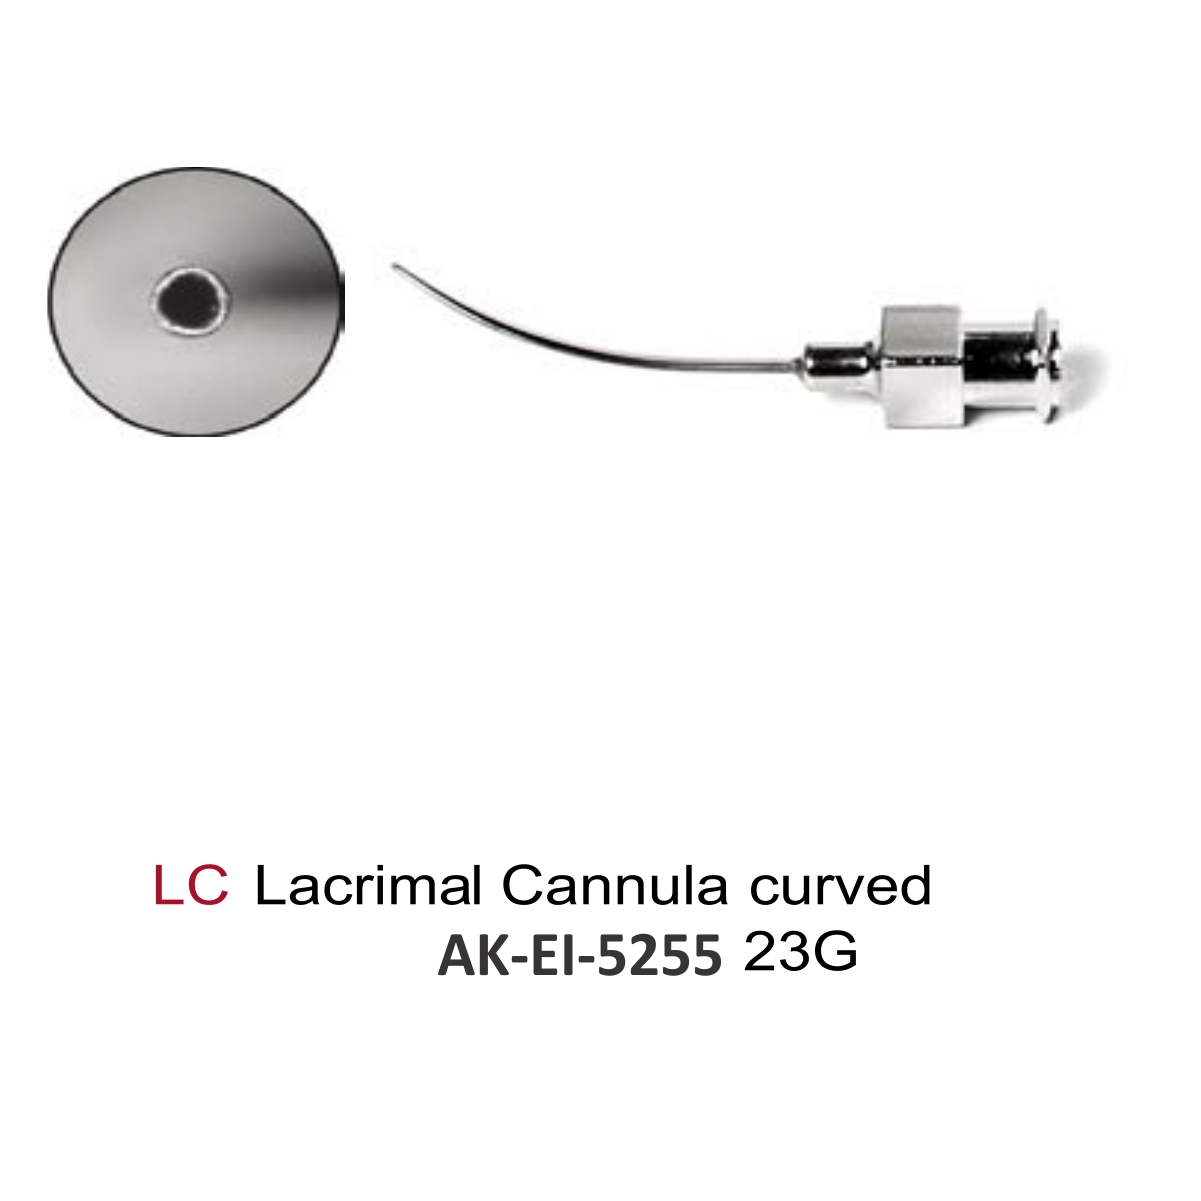 LC Lacrimal Cannula curved